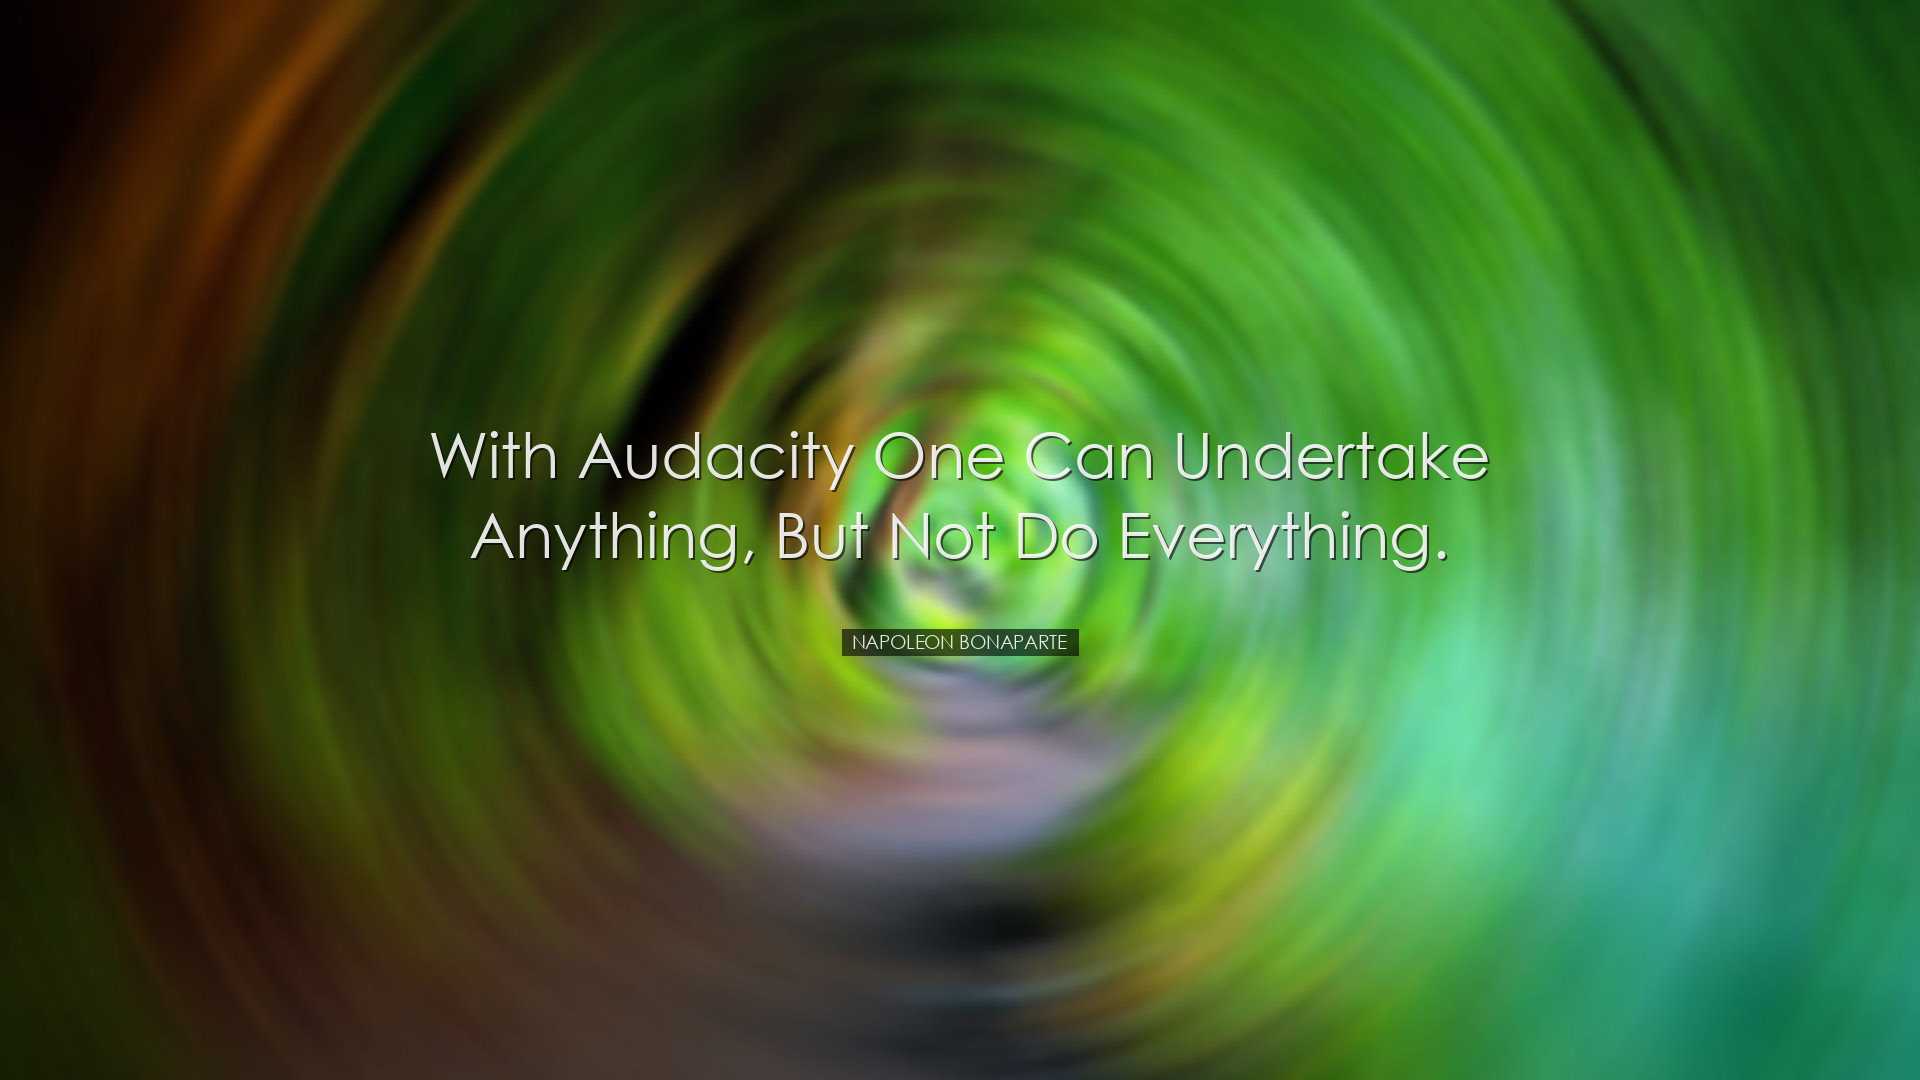 With audacity one can undertake anything, but not do everything. -